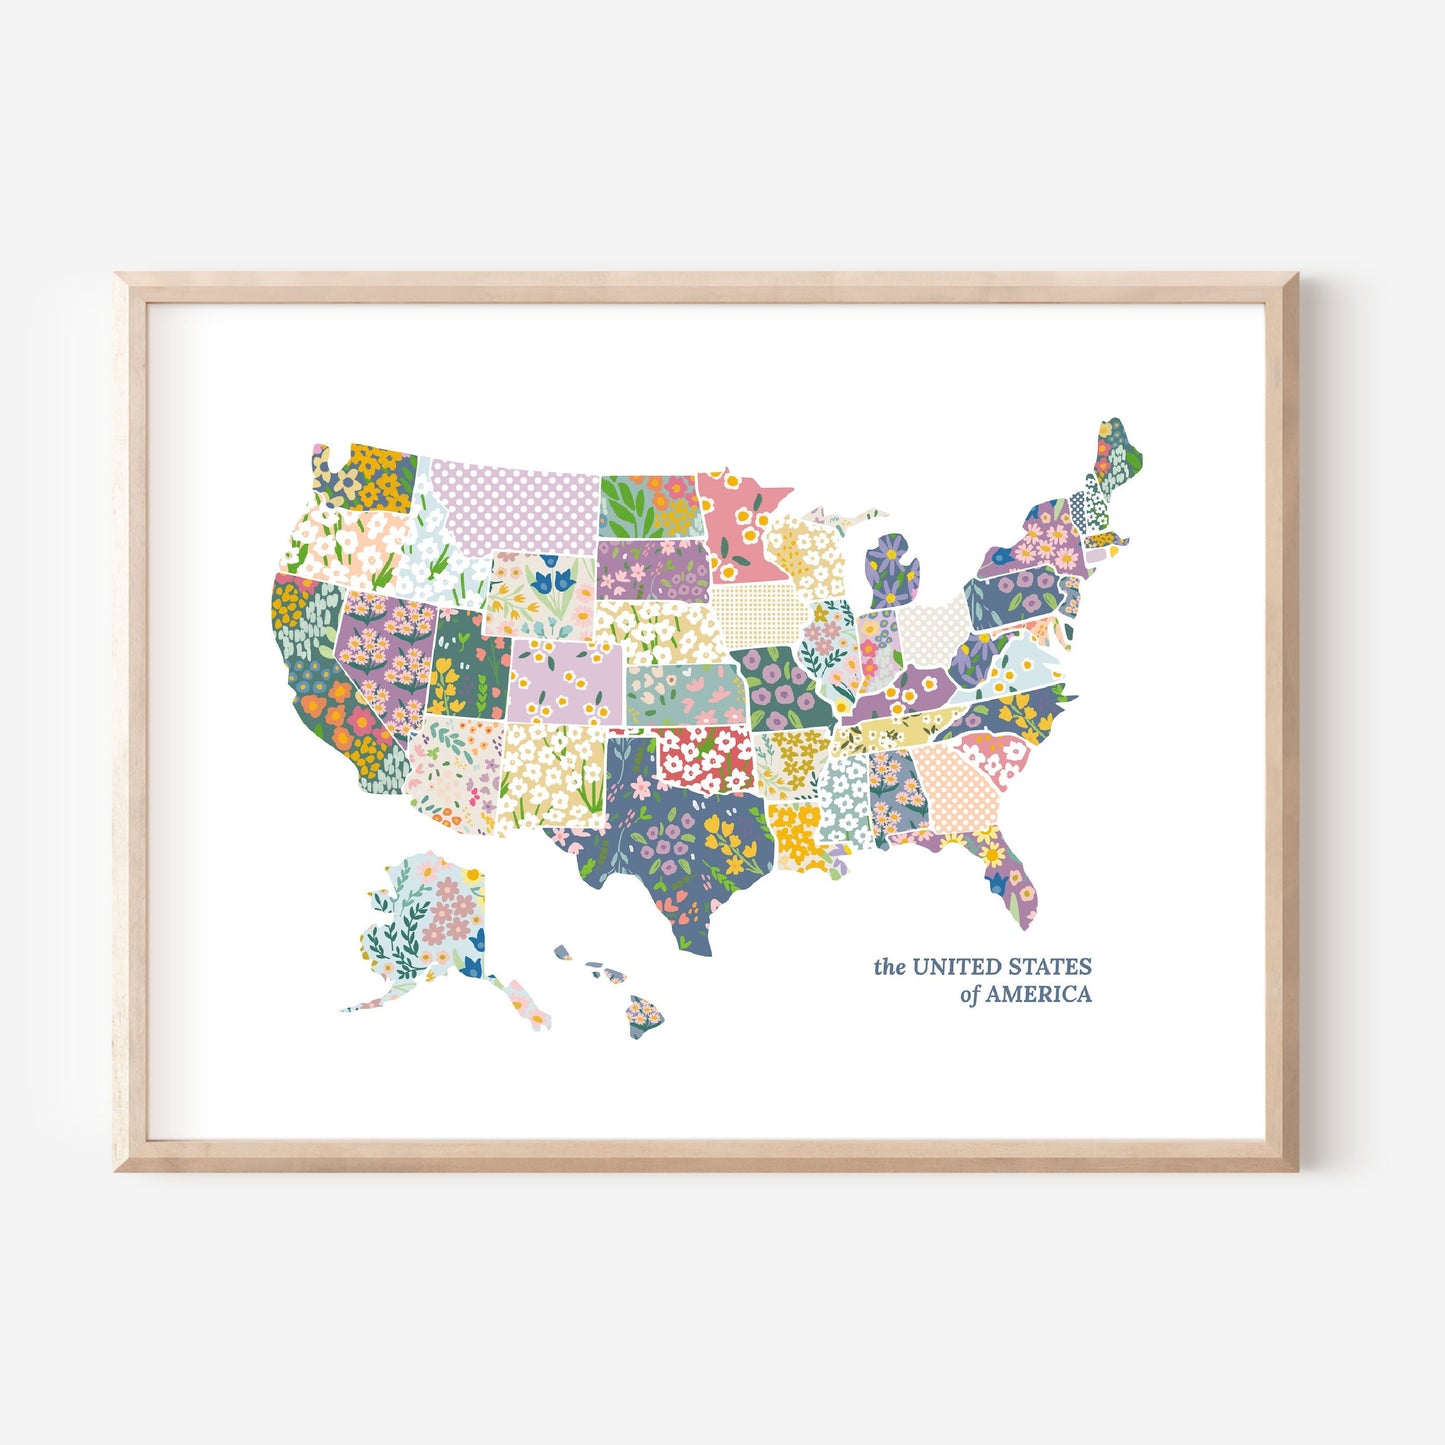 USA Map Poster | Wildflower Meadow | United States of America Patterned Art Print | 5X7 8X10 11X14 11X17 Classroom Nursery Wall Decor